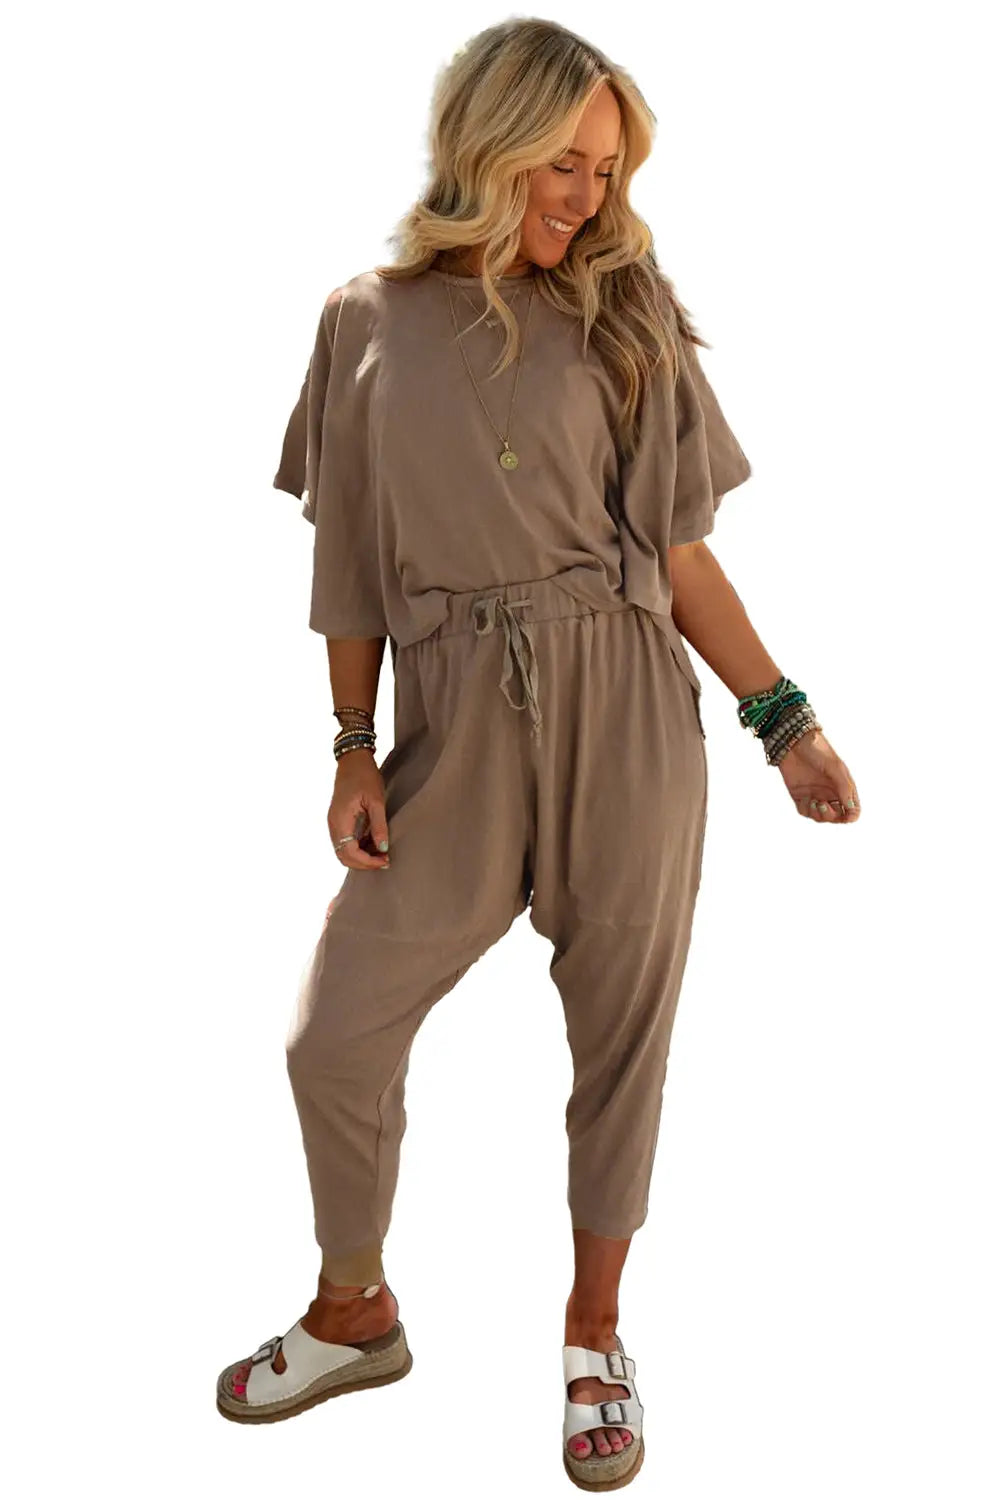 Simply taupe high low boxy fit tee and crop pants set - sets